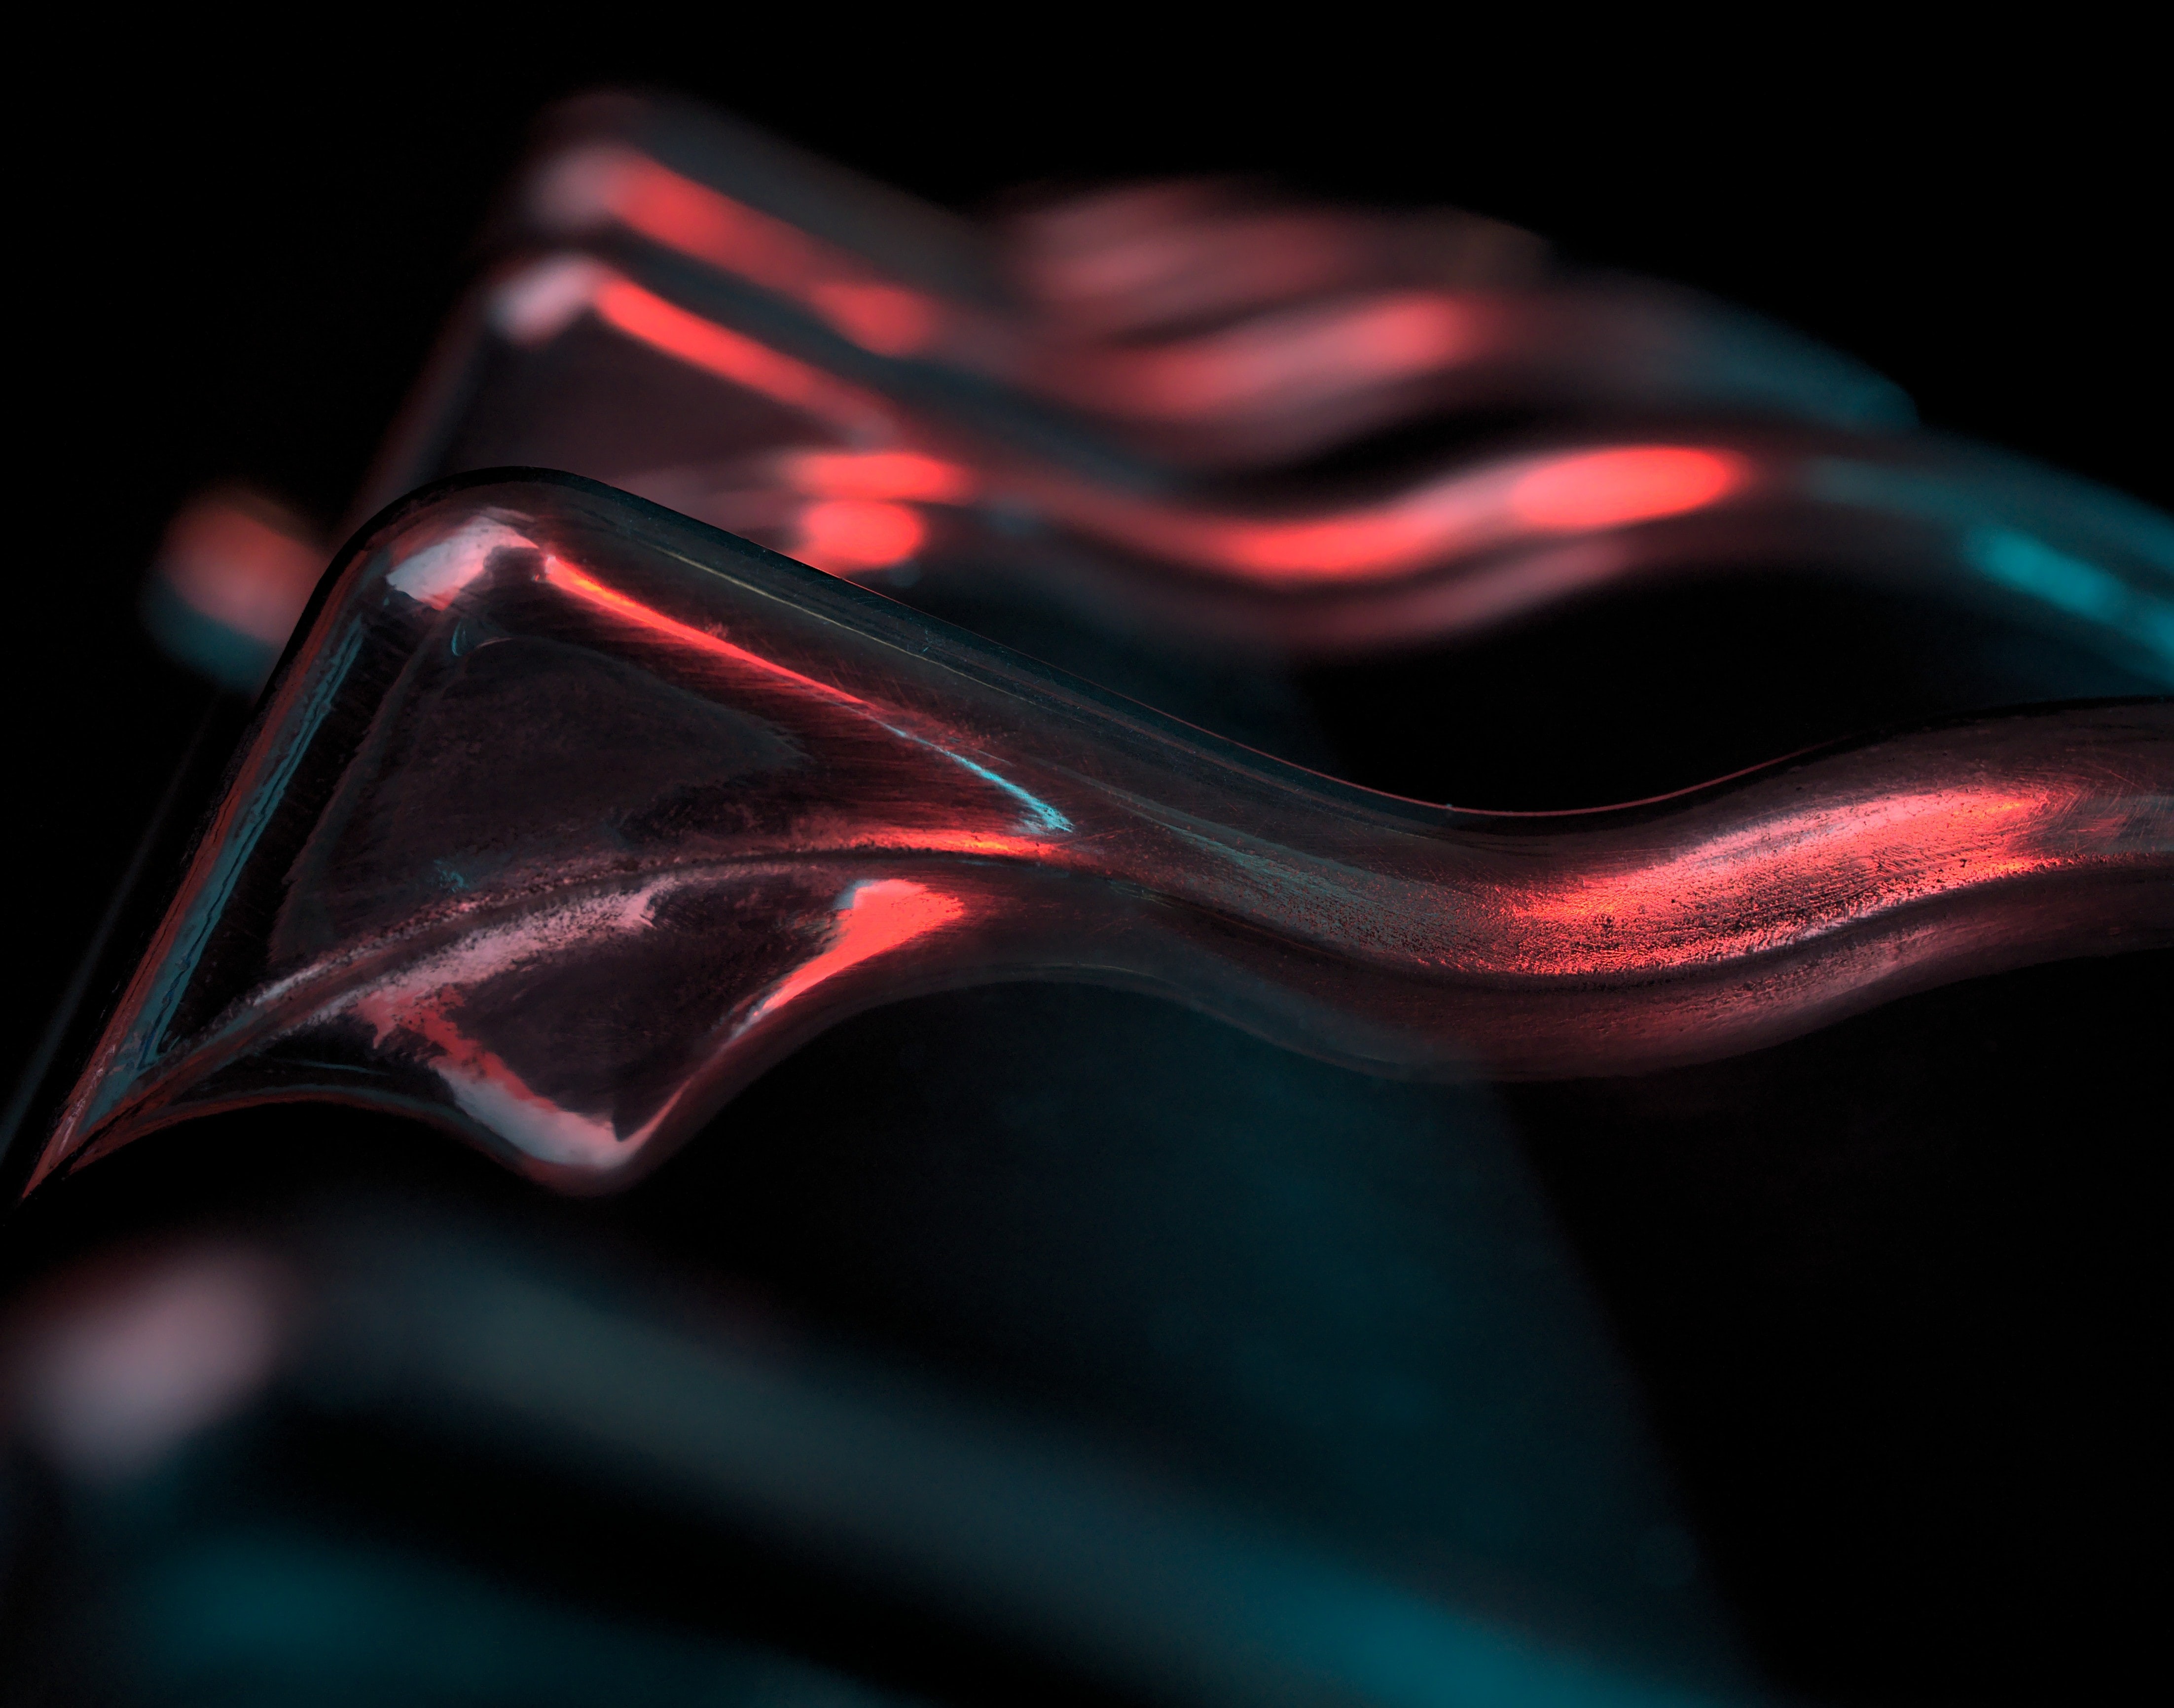 Abstract image of an object similar to waves lit by red and blue lights.